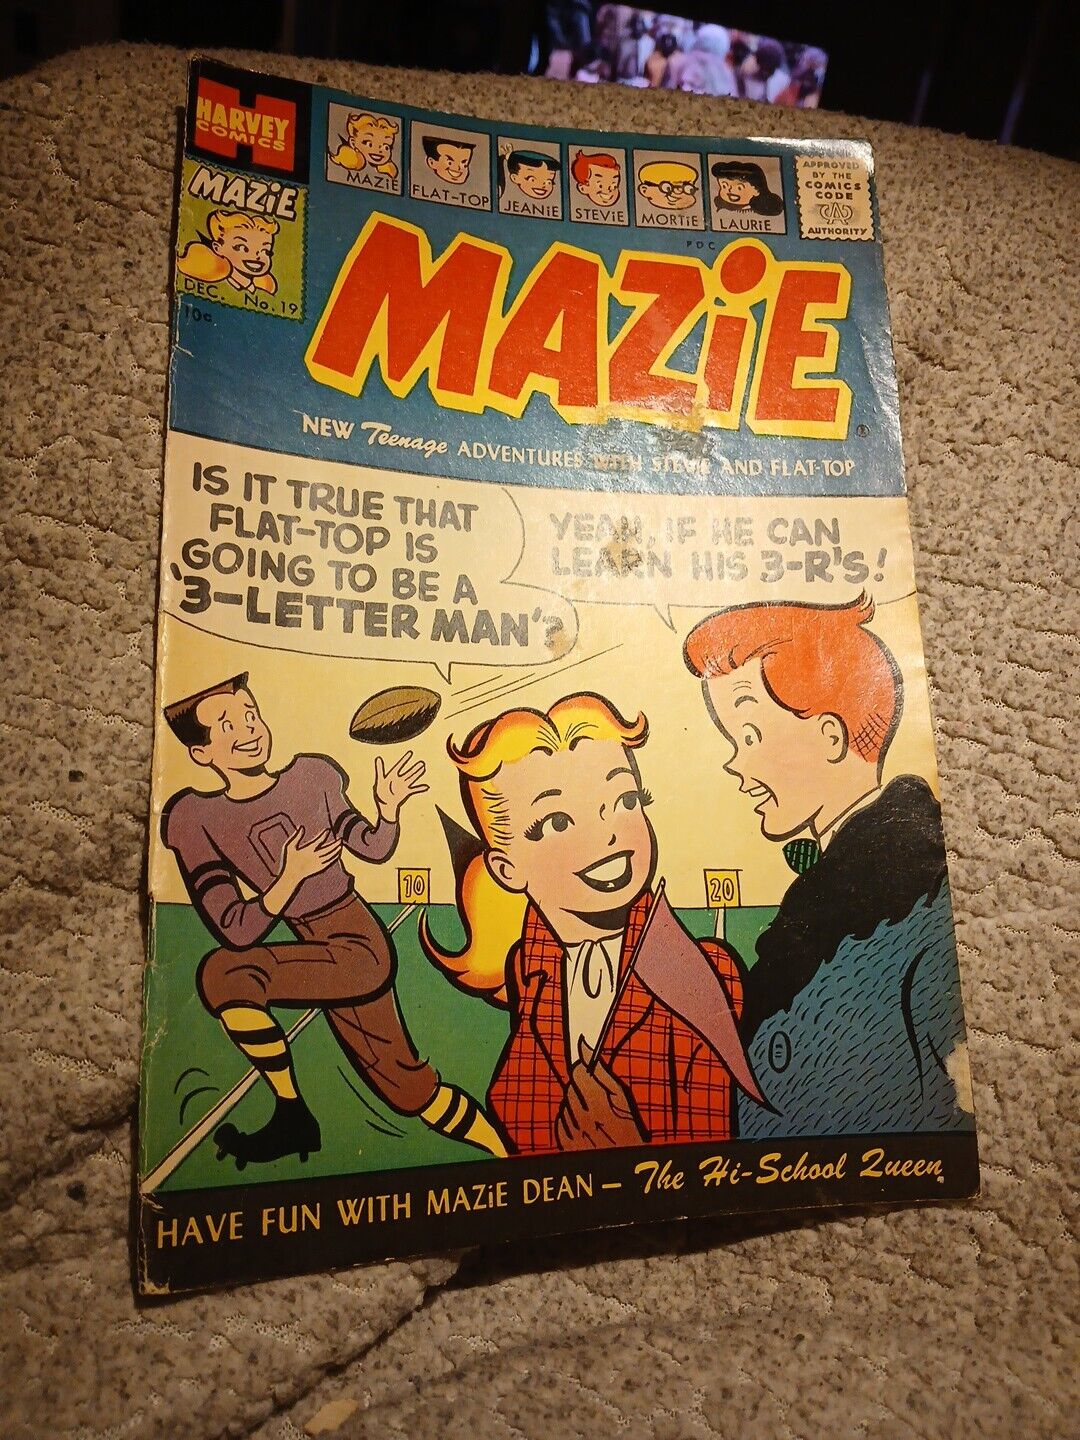 Mazie And Her Friends Stevie And Flat Top #19 Harvey Comics 1955 Golden Age Good